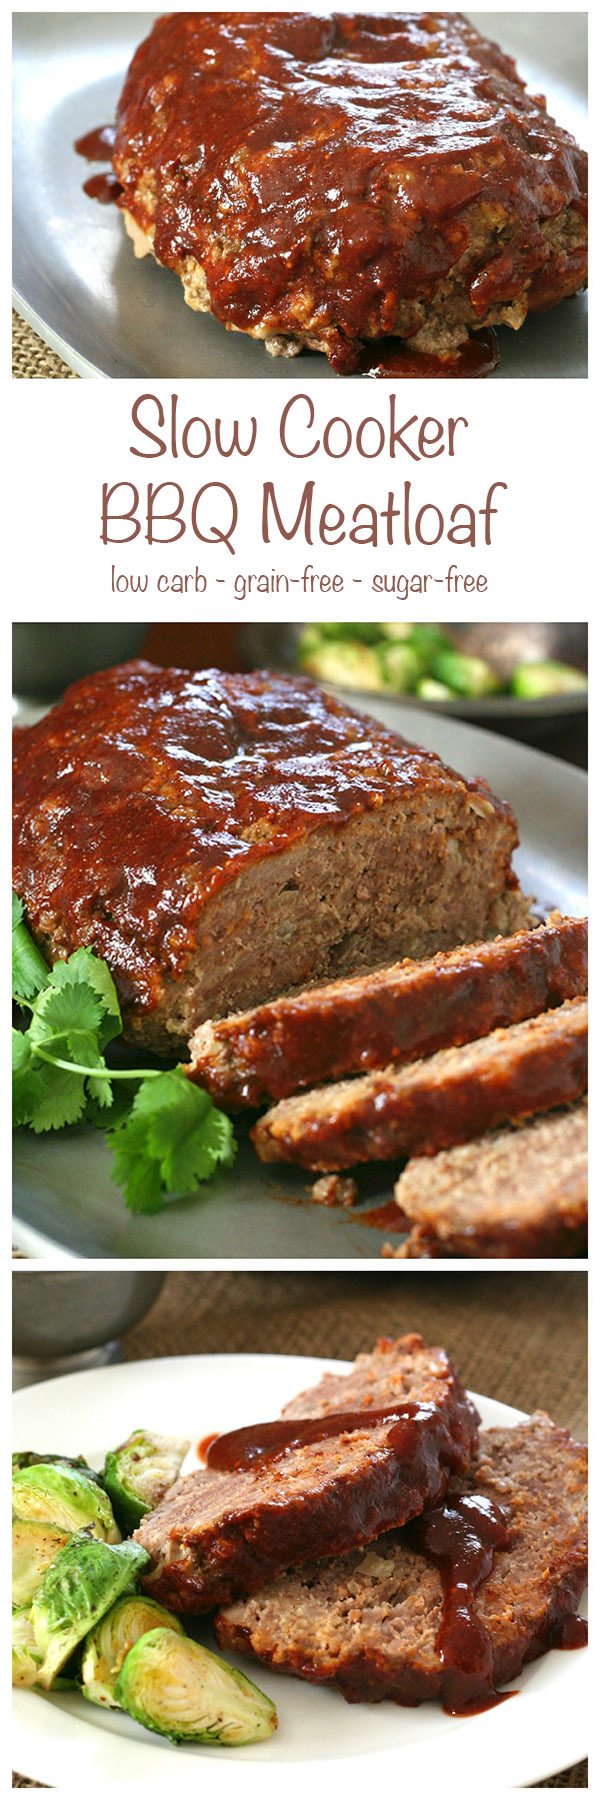 Slow Cooker BBQ Meatloaf Low Carb Gluten-Free